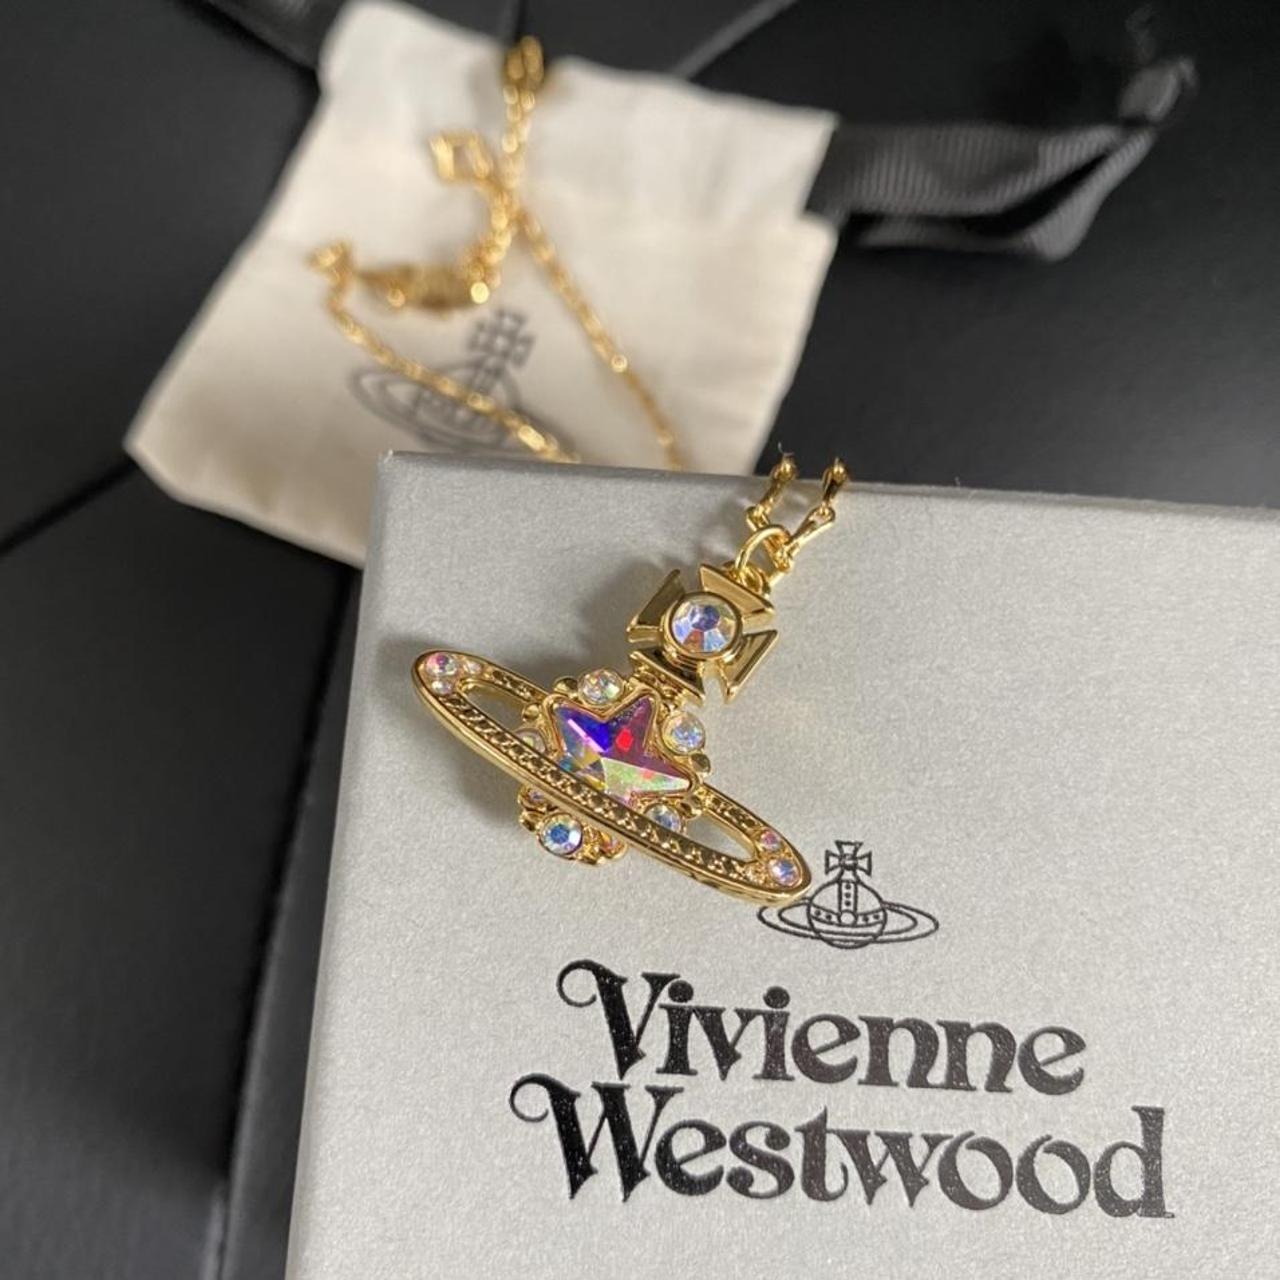 Vivienne Westwood Delicate Gold Necklace with... - Depop